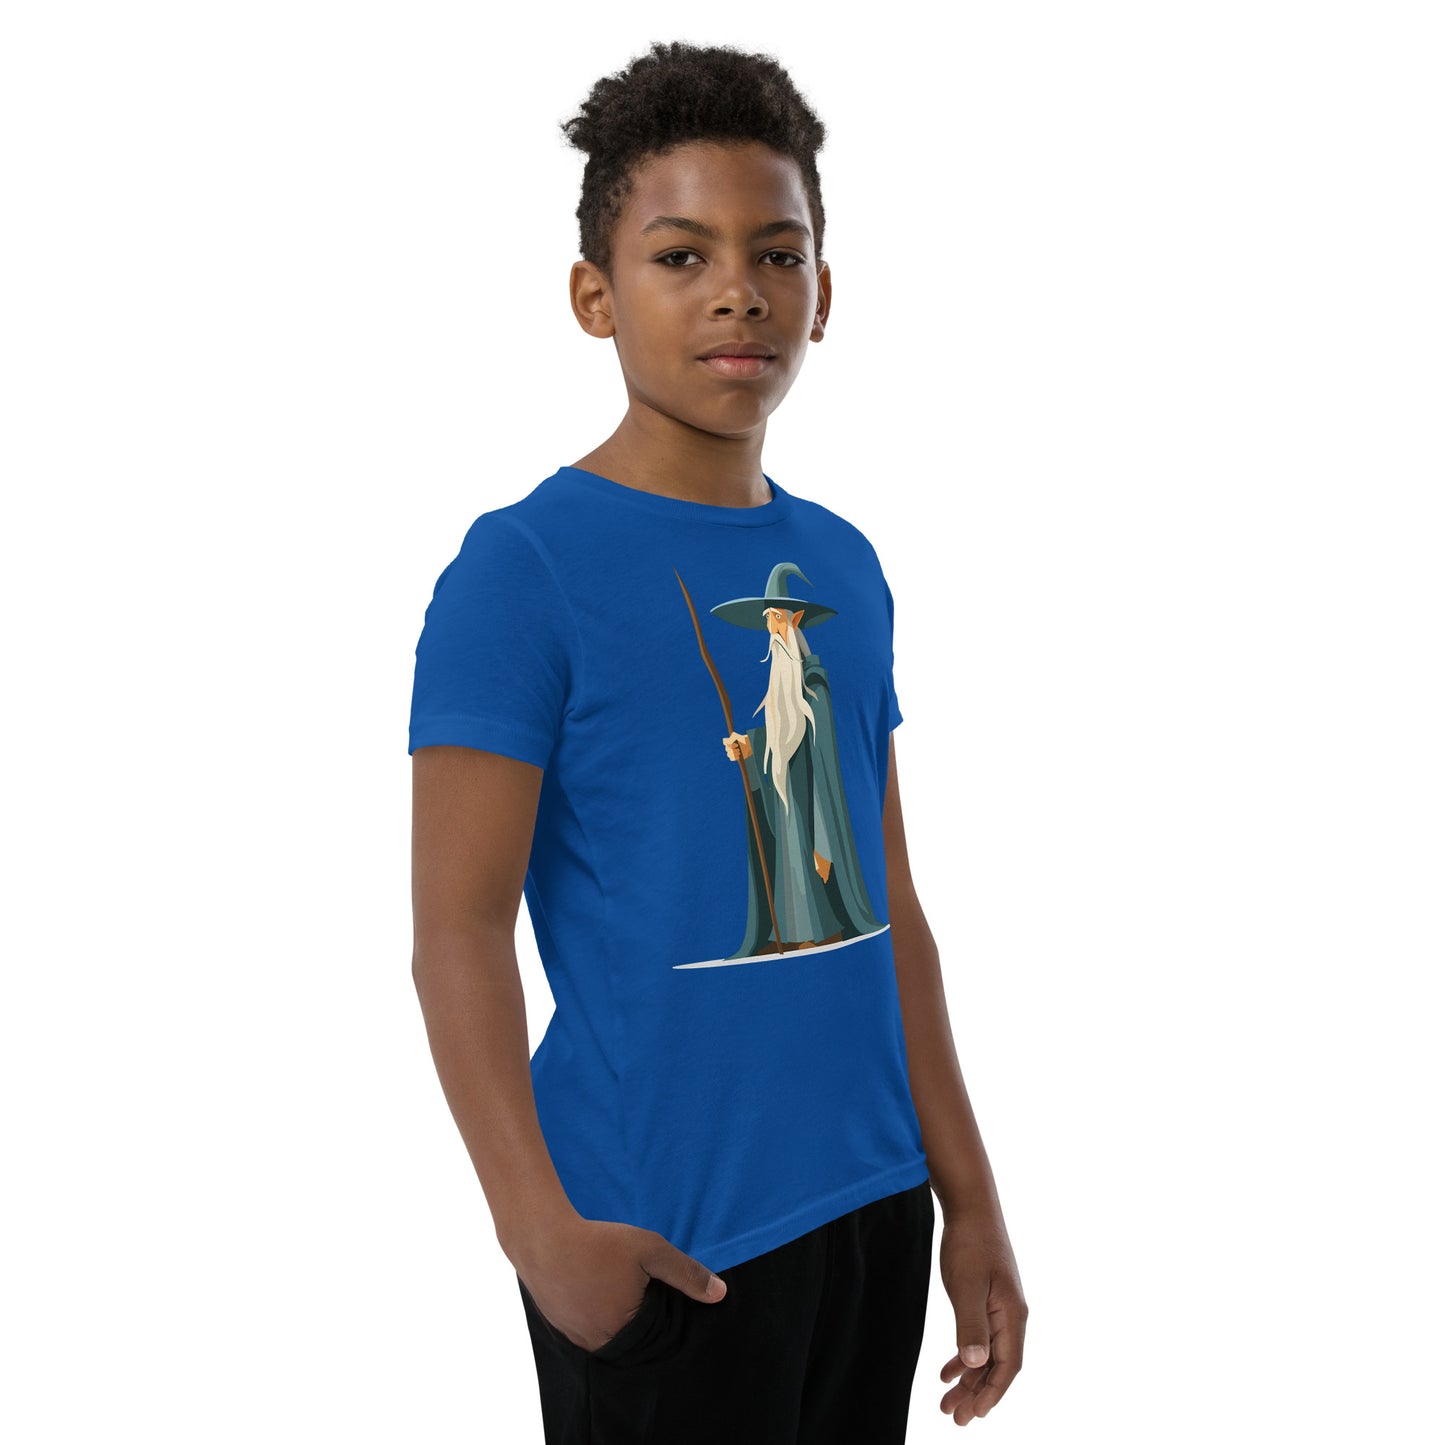 Boy with a royal blue T-shirt with a picture of a magician